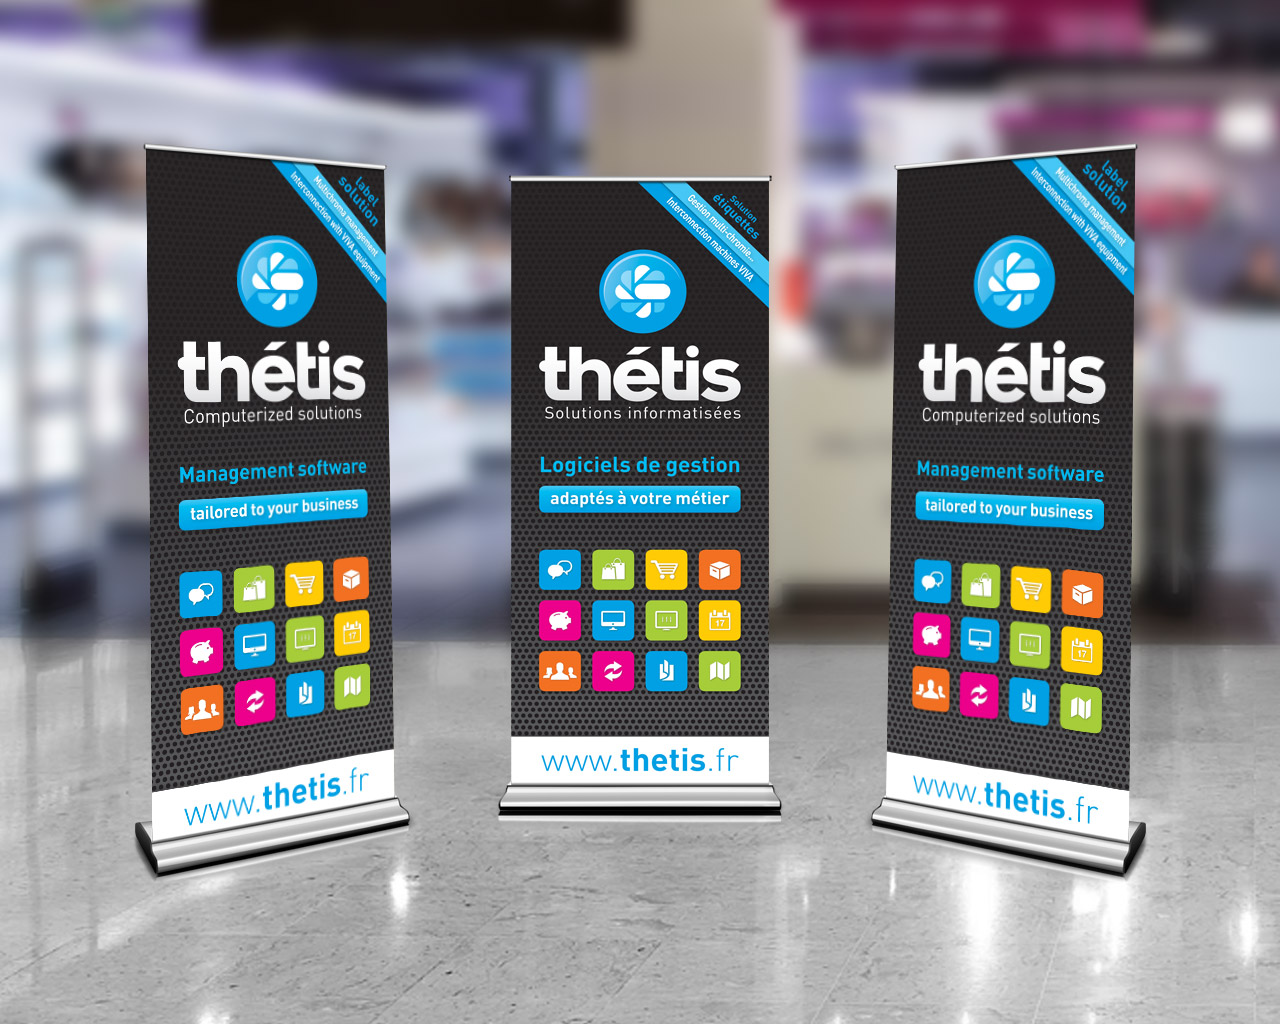 thetis-stand-roll-up-creation-communication-caconcept-alexis-cretin-graphiste